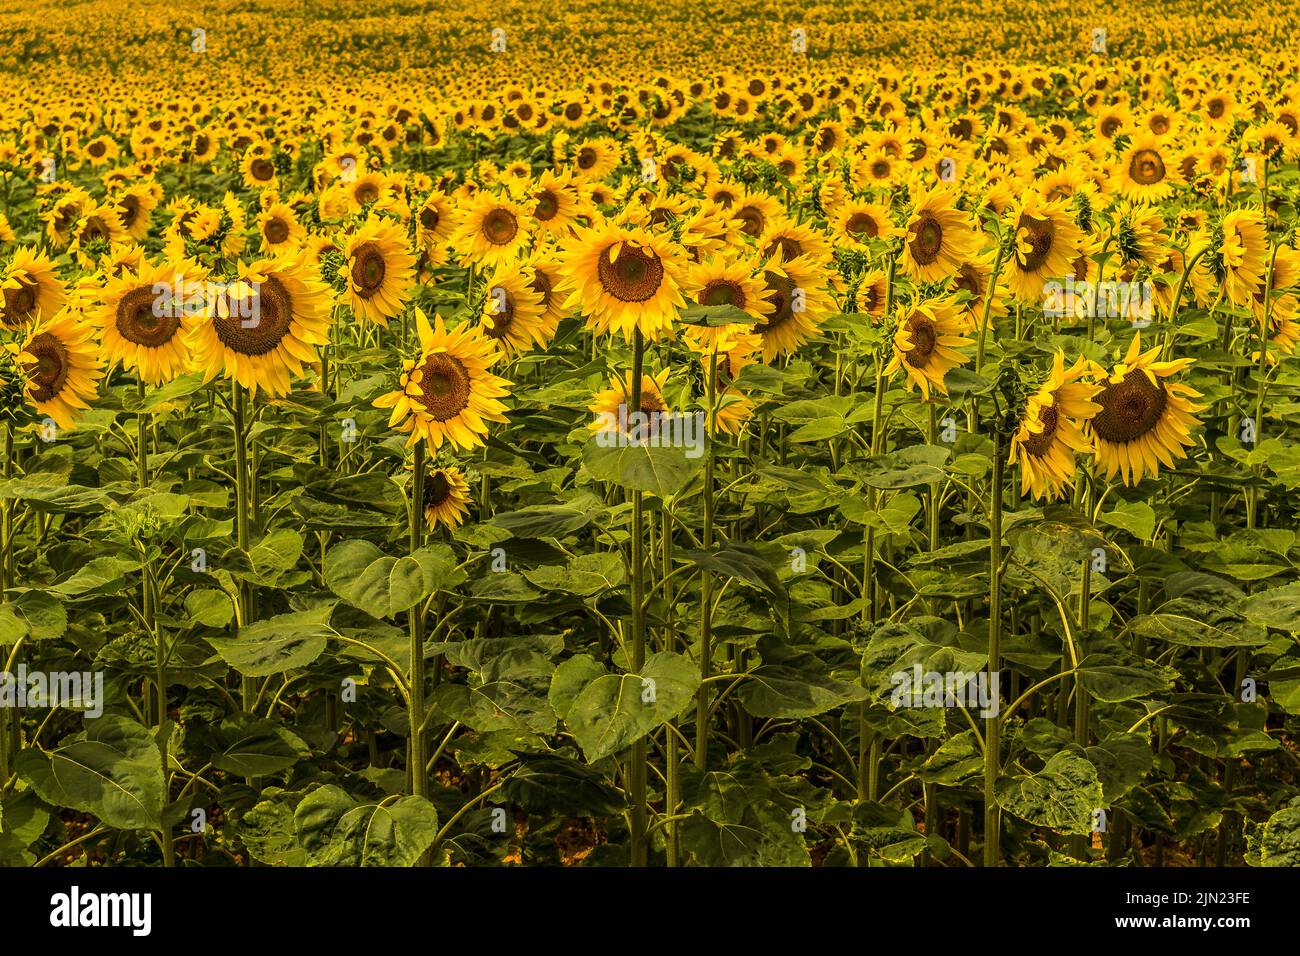 A field of sunflowers taken in Boussac - Boussac is a commune in the Creuse department in the Nouvelle-Aquitaine region in central France. Stock Photo